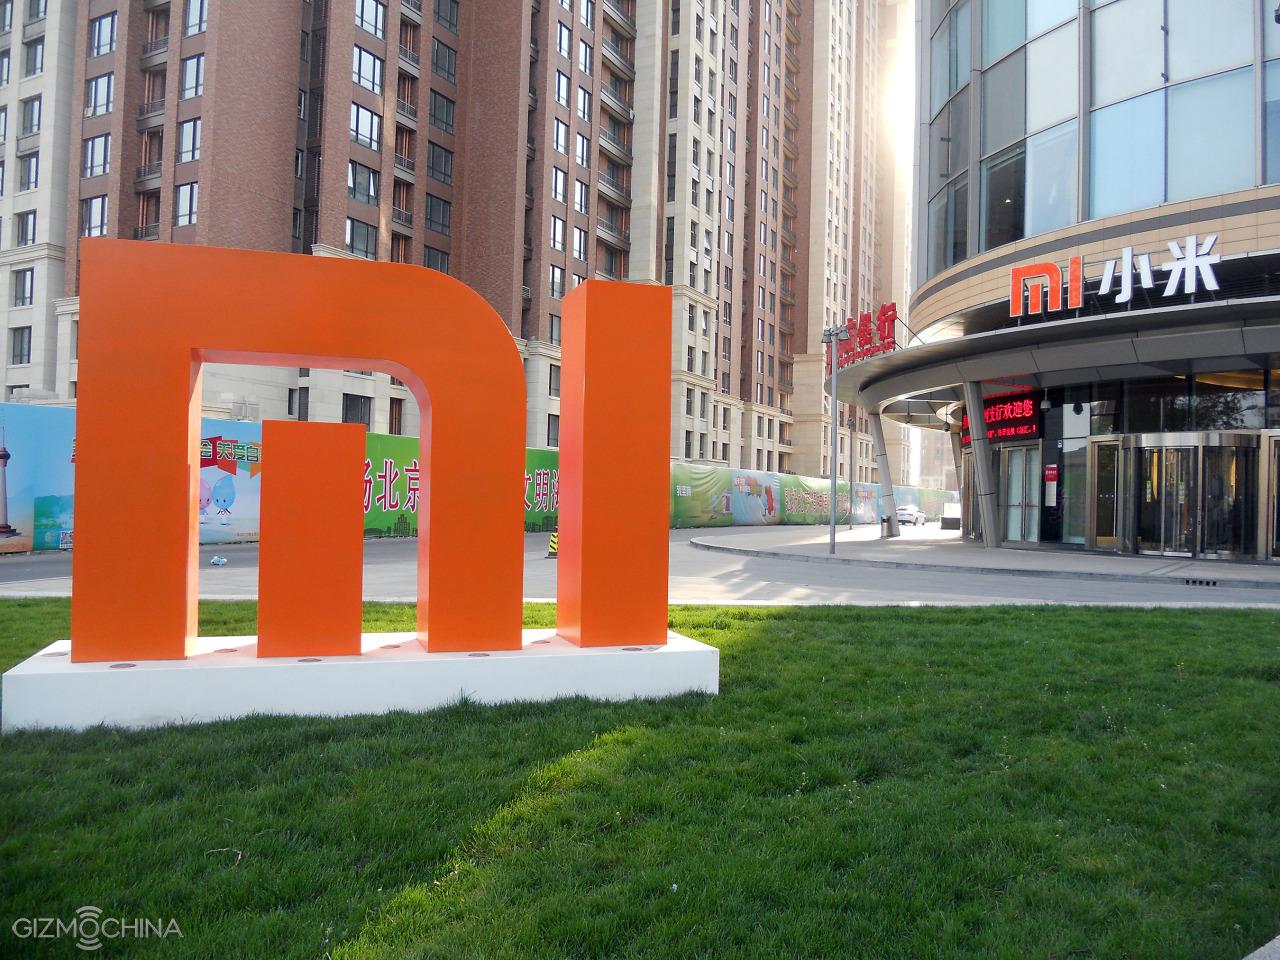 Xiaomi aims to overtake Huawei and Apple next year with 240 million smartphone shipments